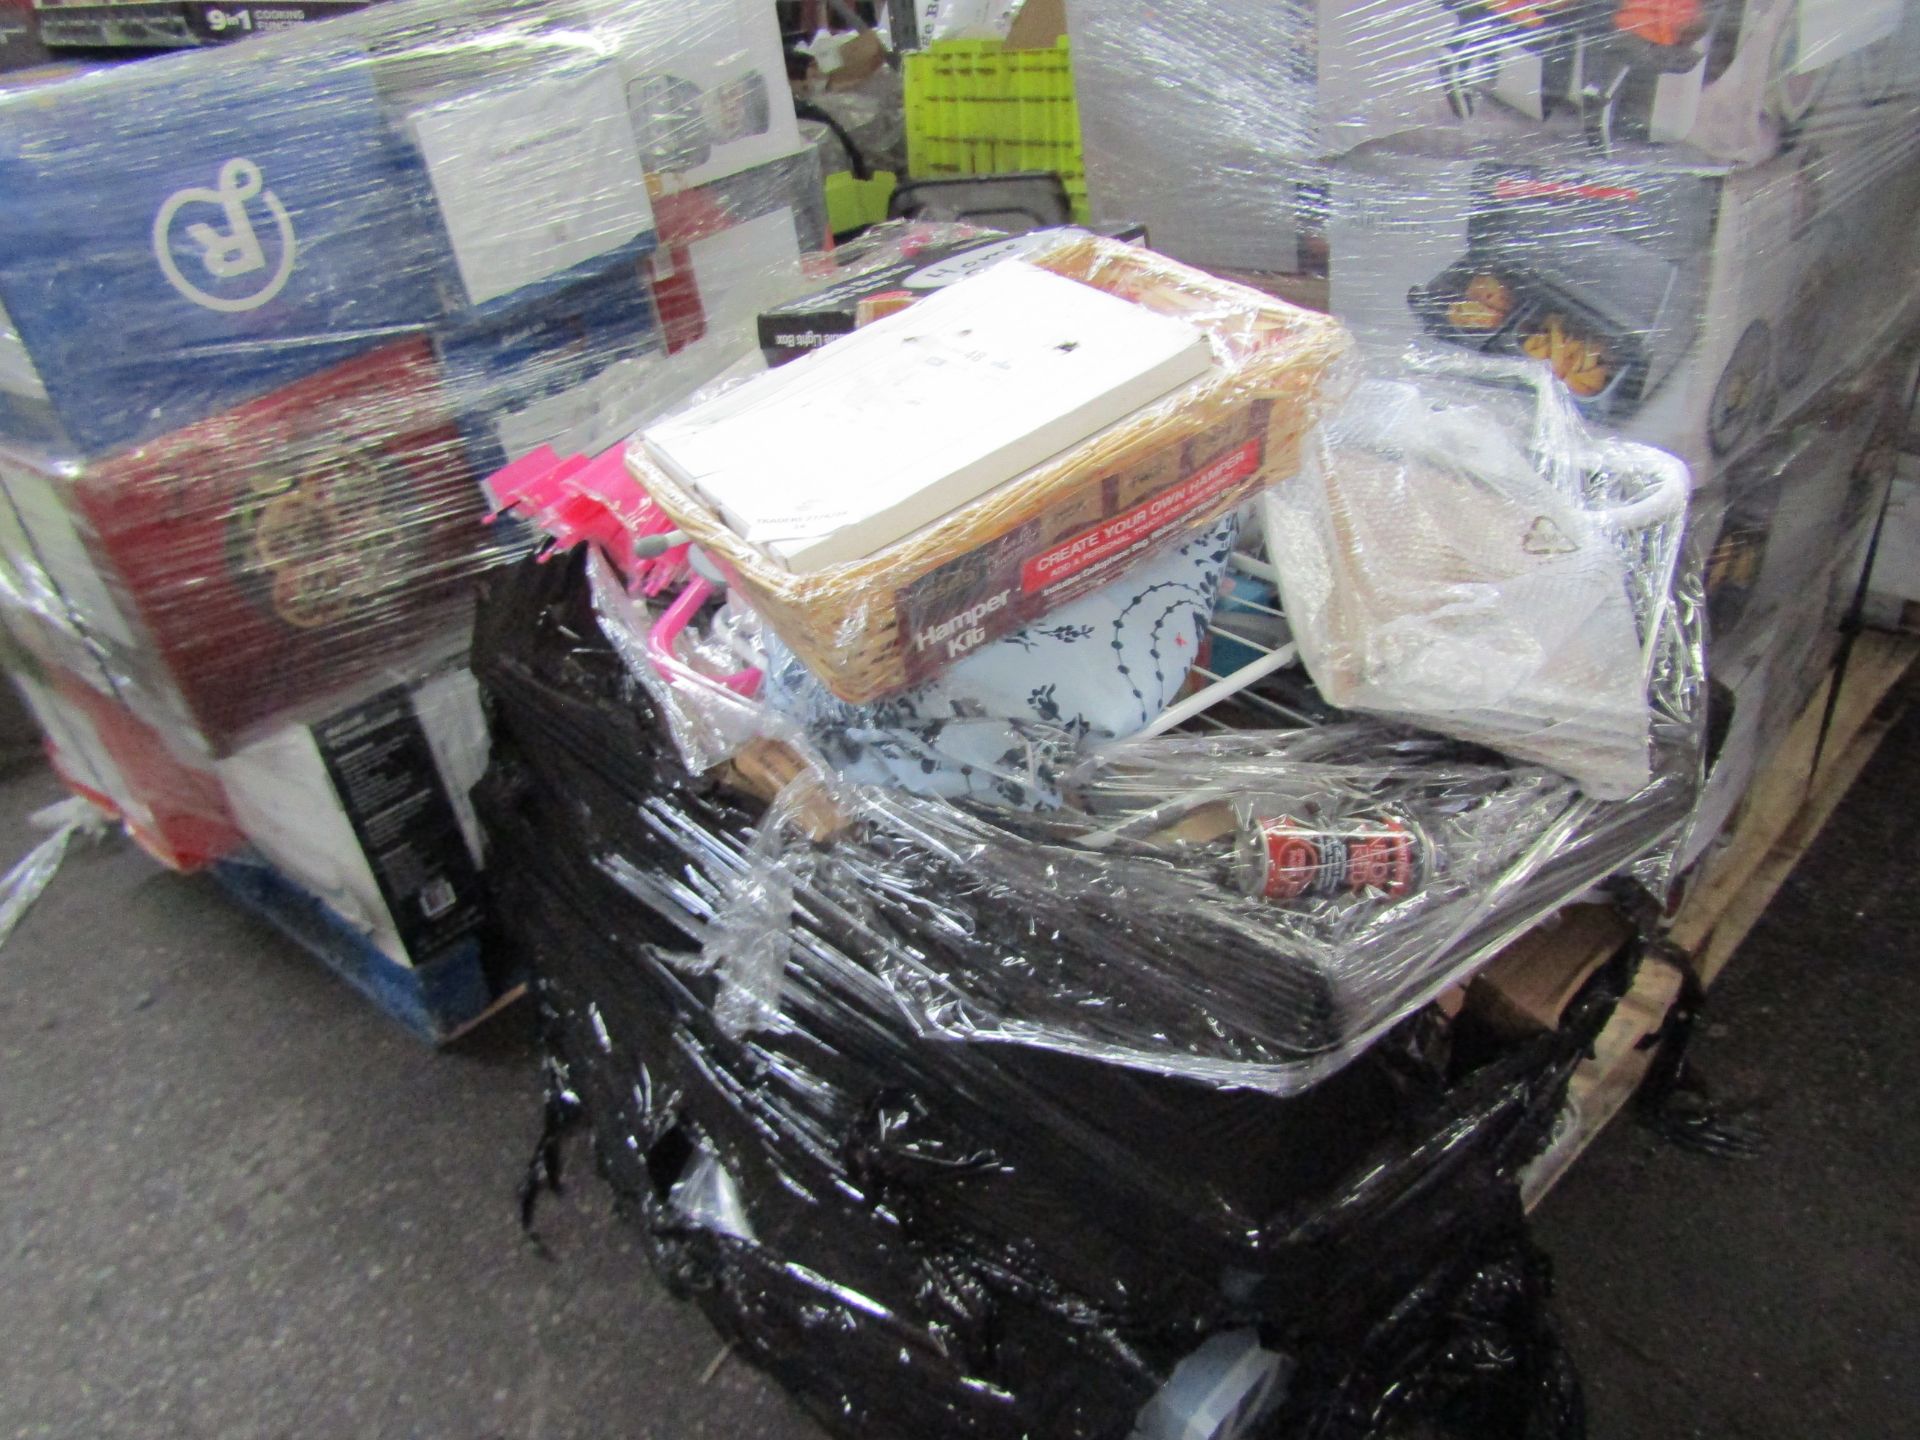 Pallet of unmanifested customer returns, can contain unwanted, refused delivery, missing parts and